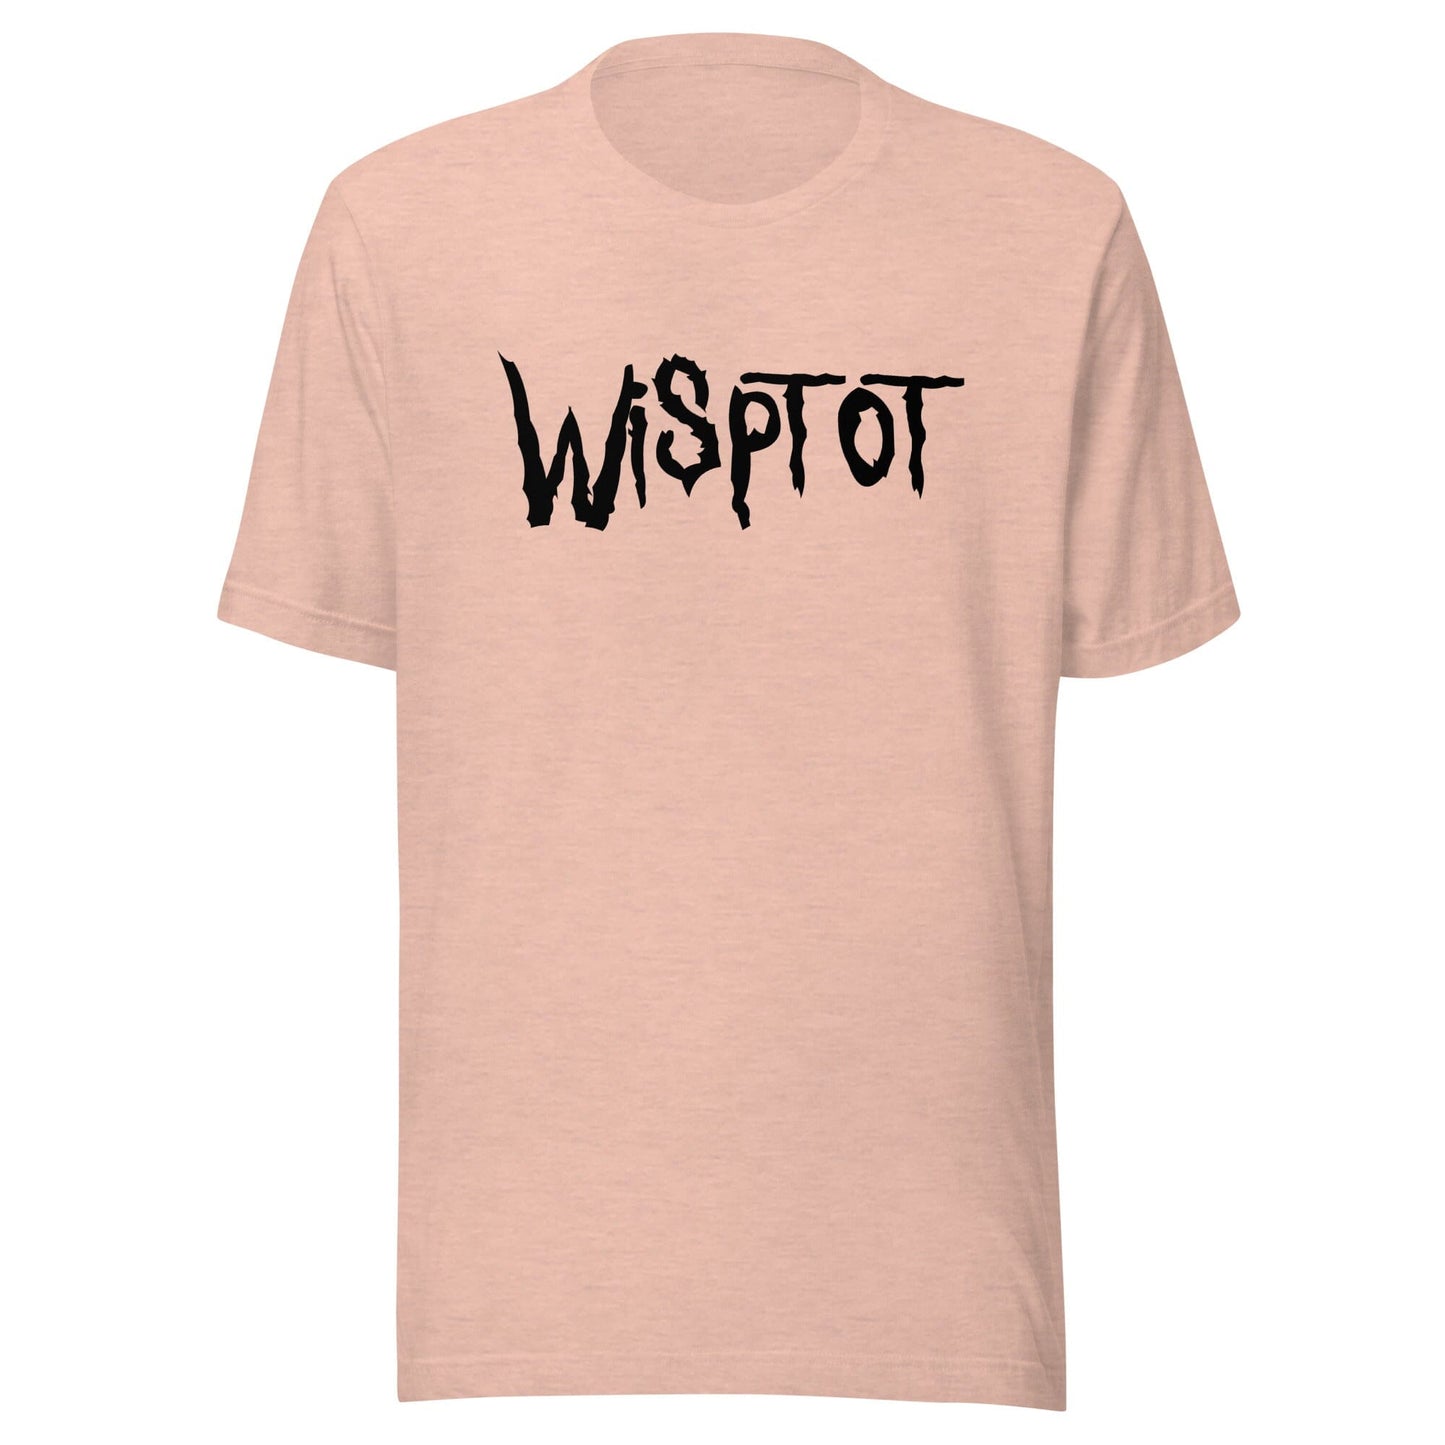 WispTot T-Shirt (Extended Sizing) [Unfoiled] (All net proceeds go to equally to Kitty CrusAIDe and Rags to Riches Animal Rescue) JoyousJoyfulJoyness Heather Prism Peach 3XL 